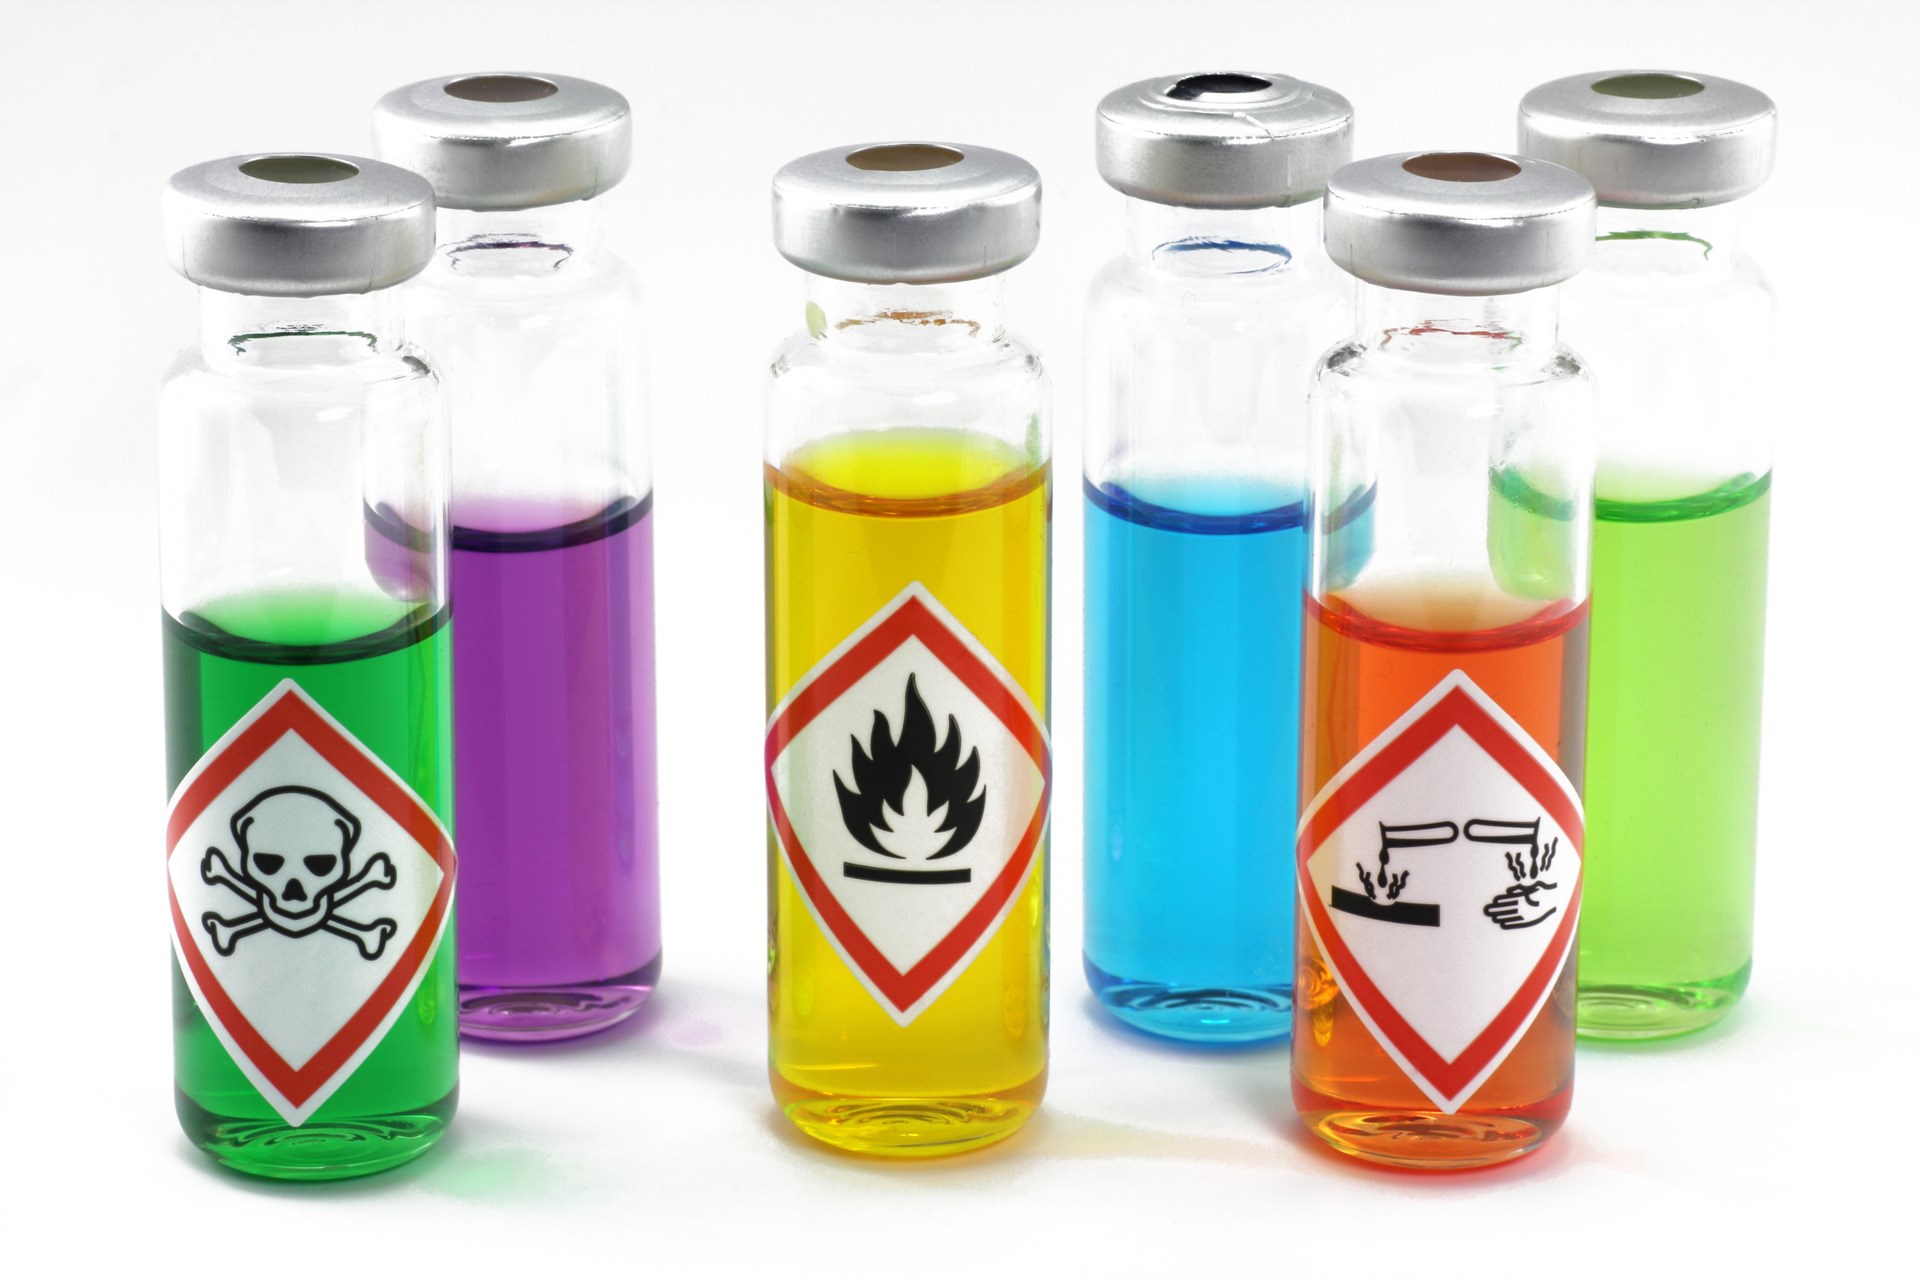 Coloured chemicals in small containers